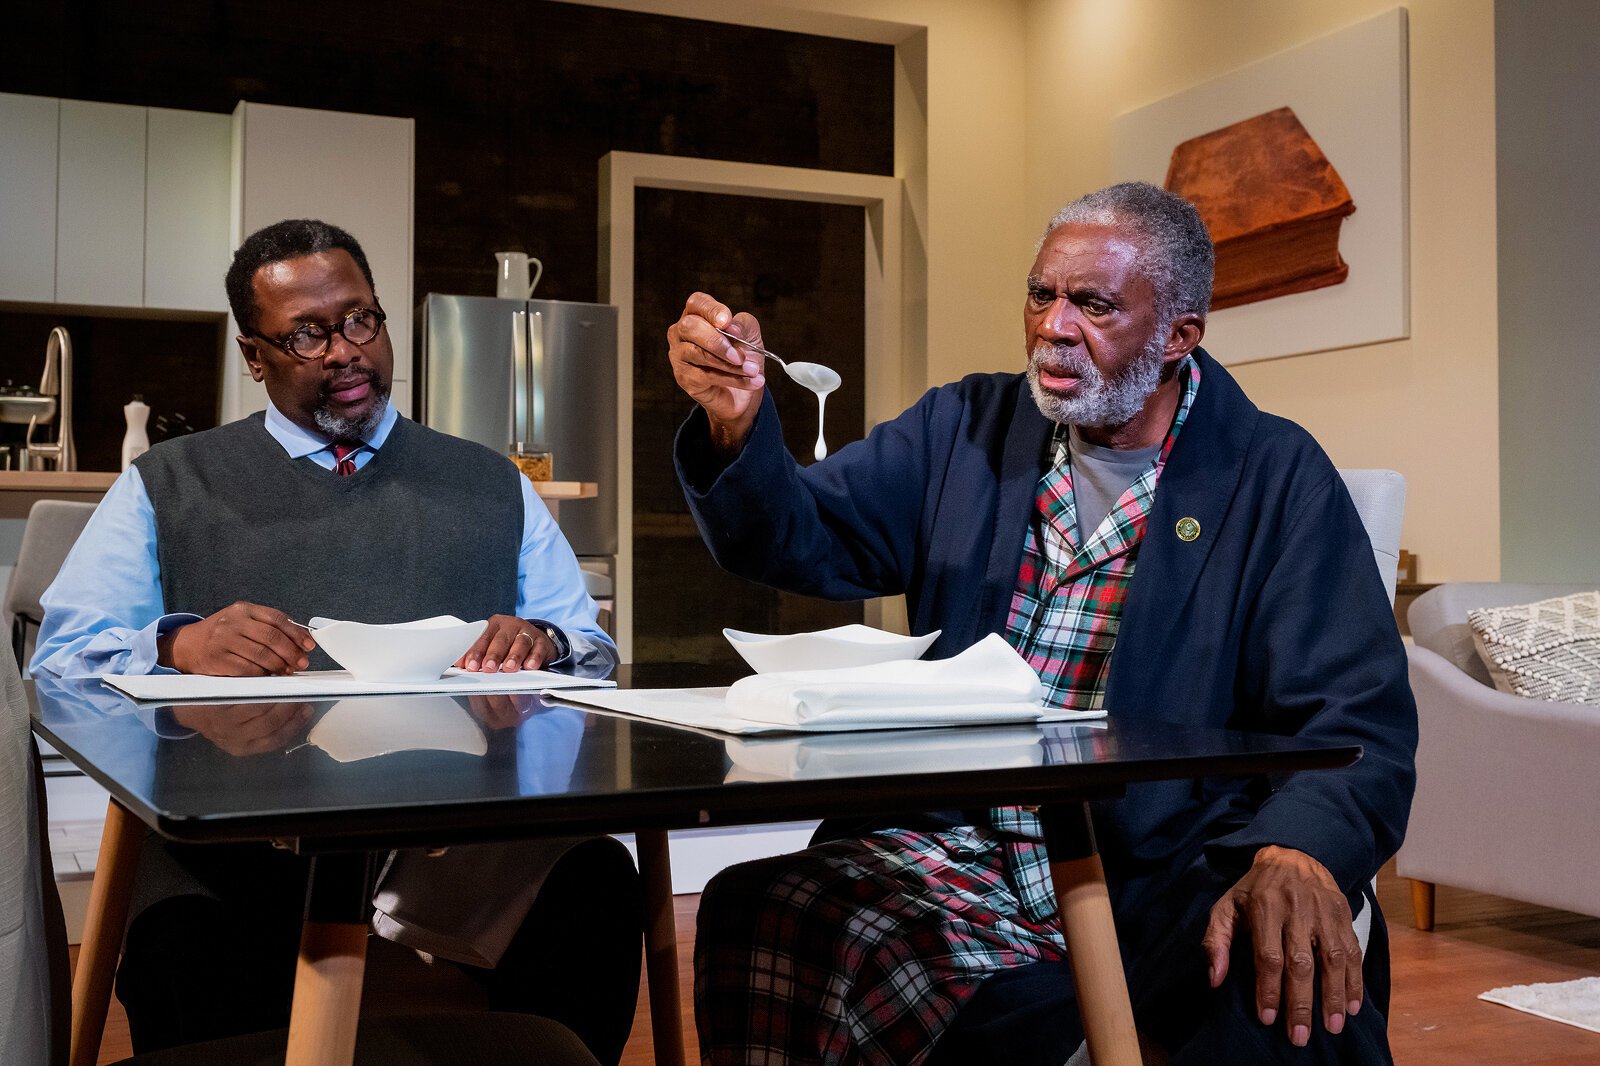 Wendell Pierce and Charlie Robinson in the UMS Digital Presentation of Some Old Black Man.